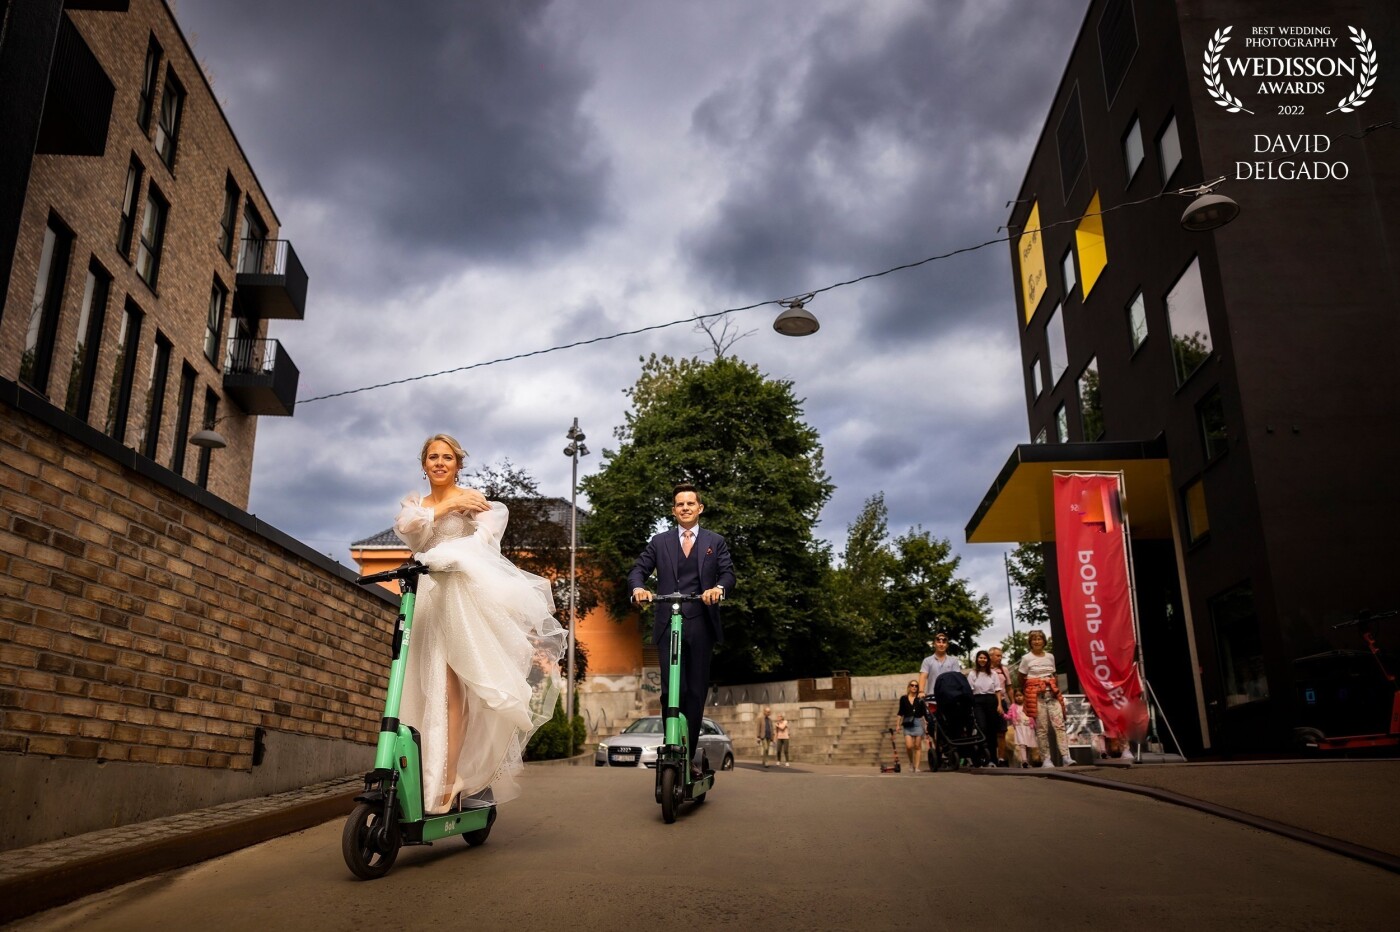 Downhill - From Norway with love and the smell of summer, Maria & Kjartan gave us fun moments on the streets of Oslo on their wedding day